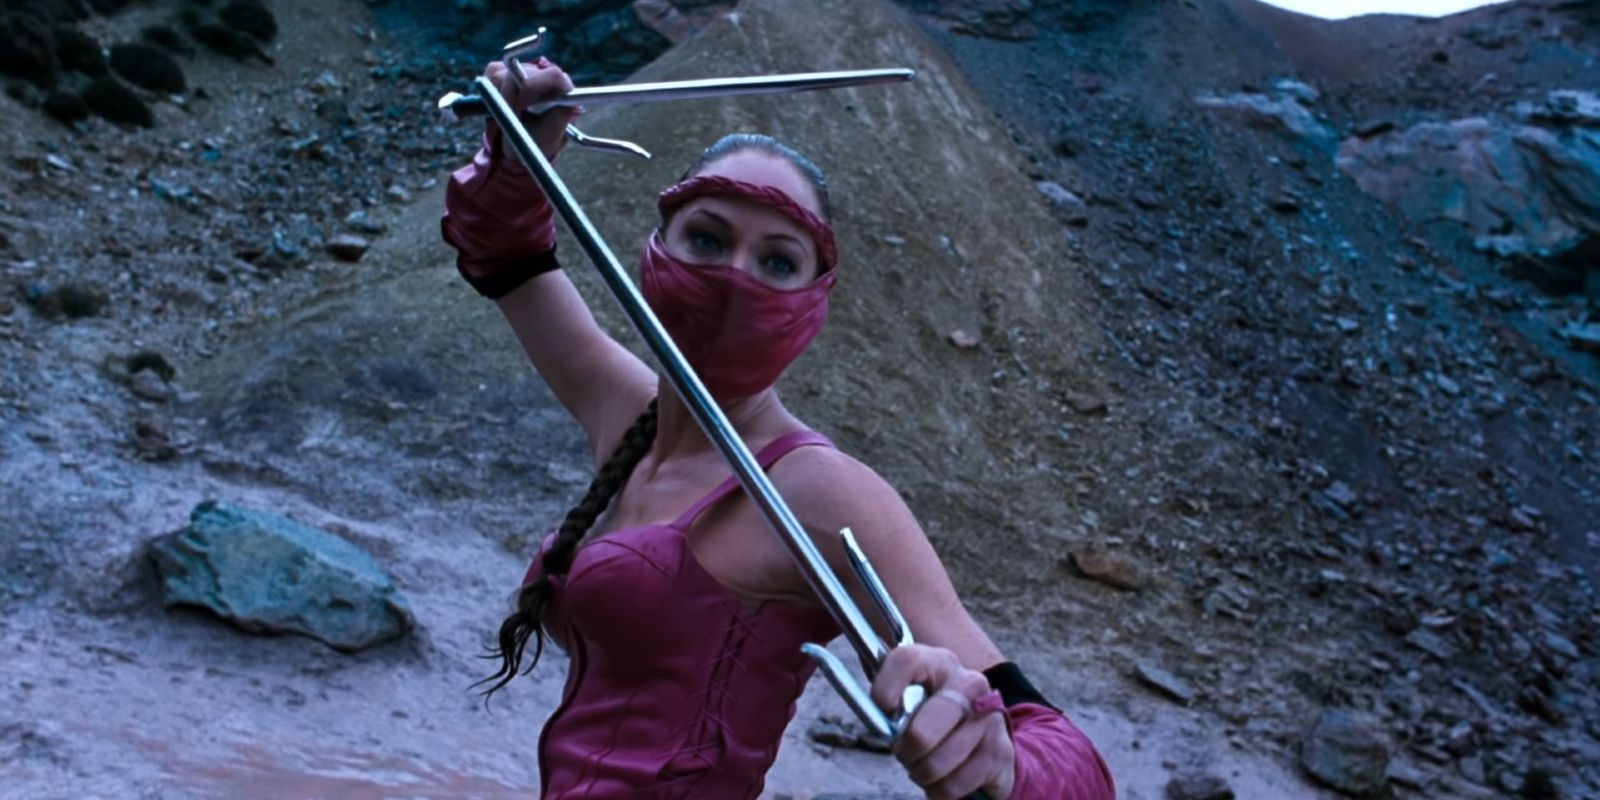 Mileena with knives confronting Sonya Blade in Mortal Kombat Annihilation